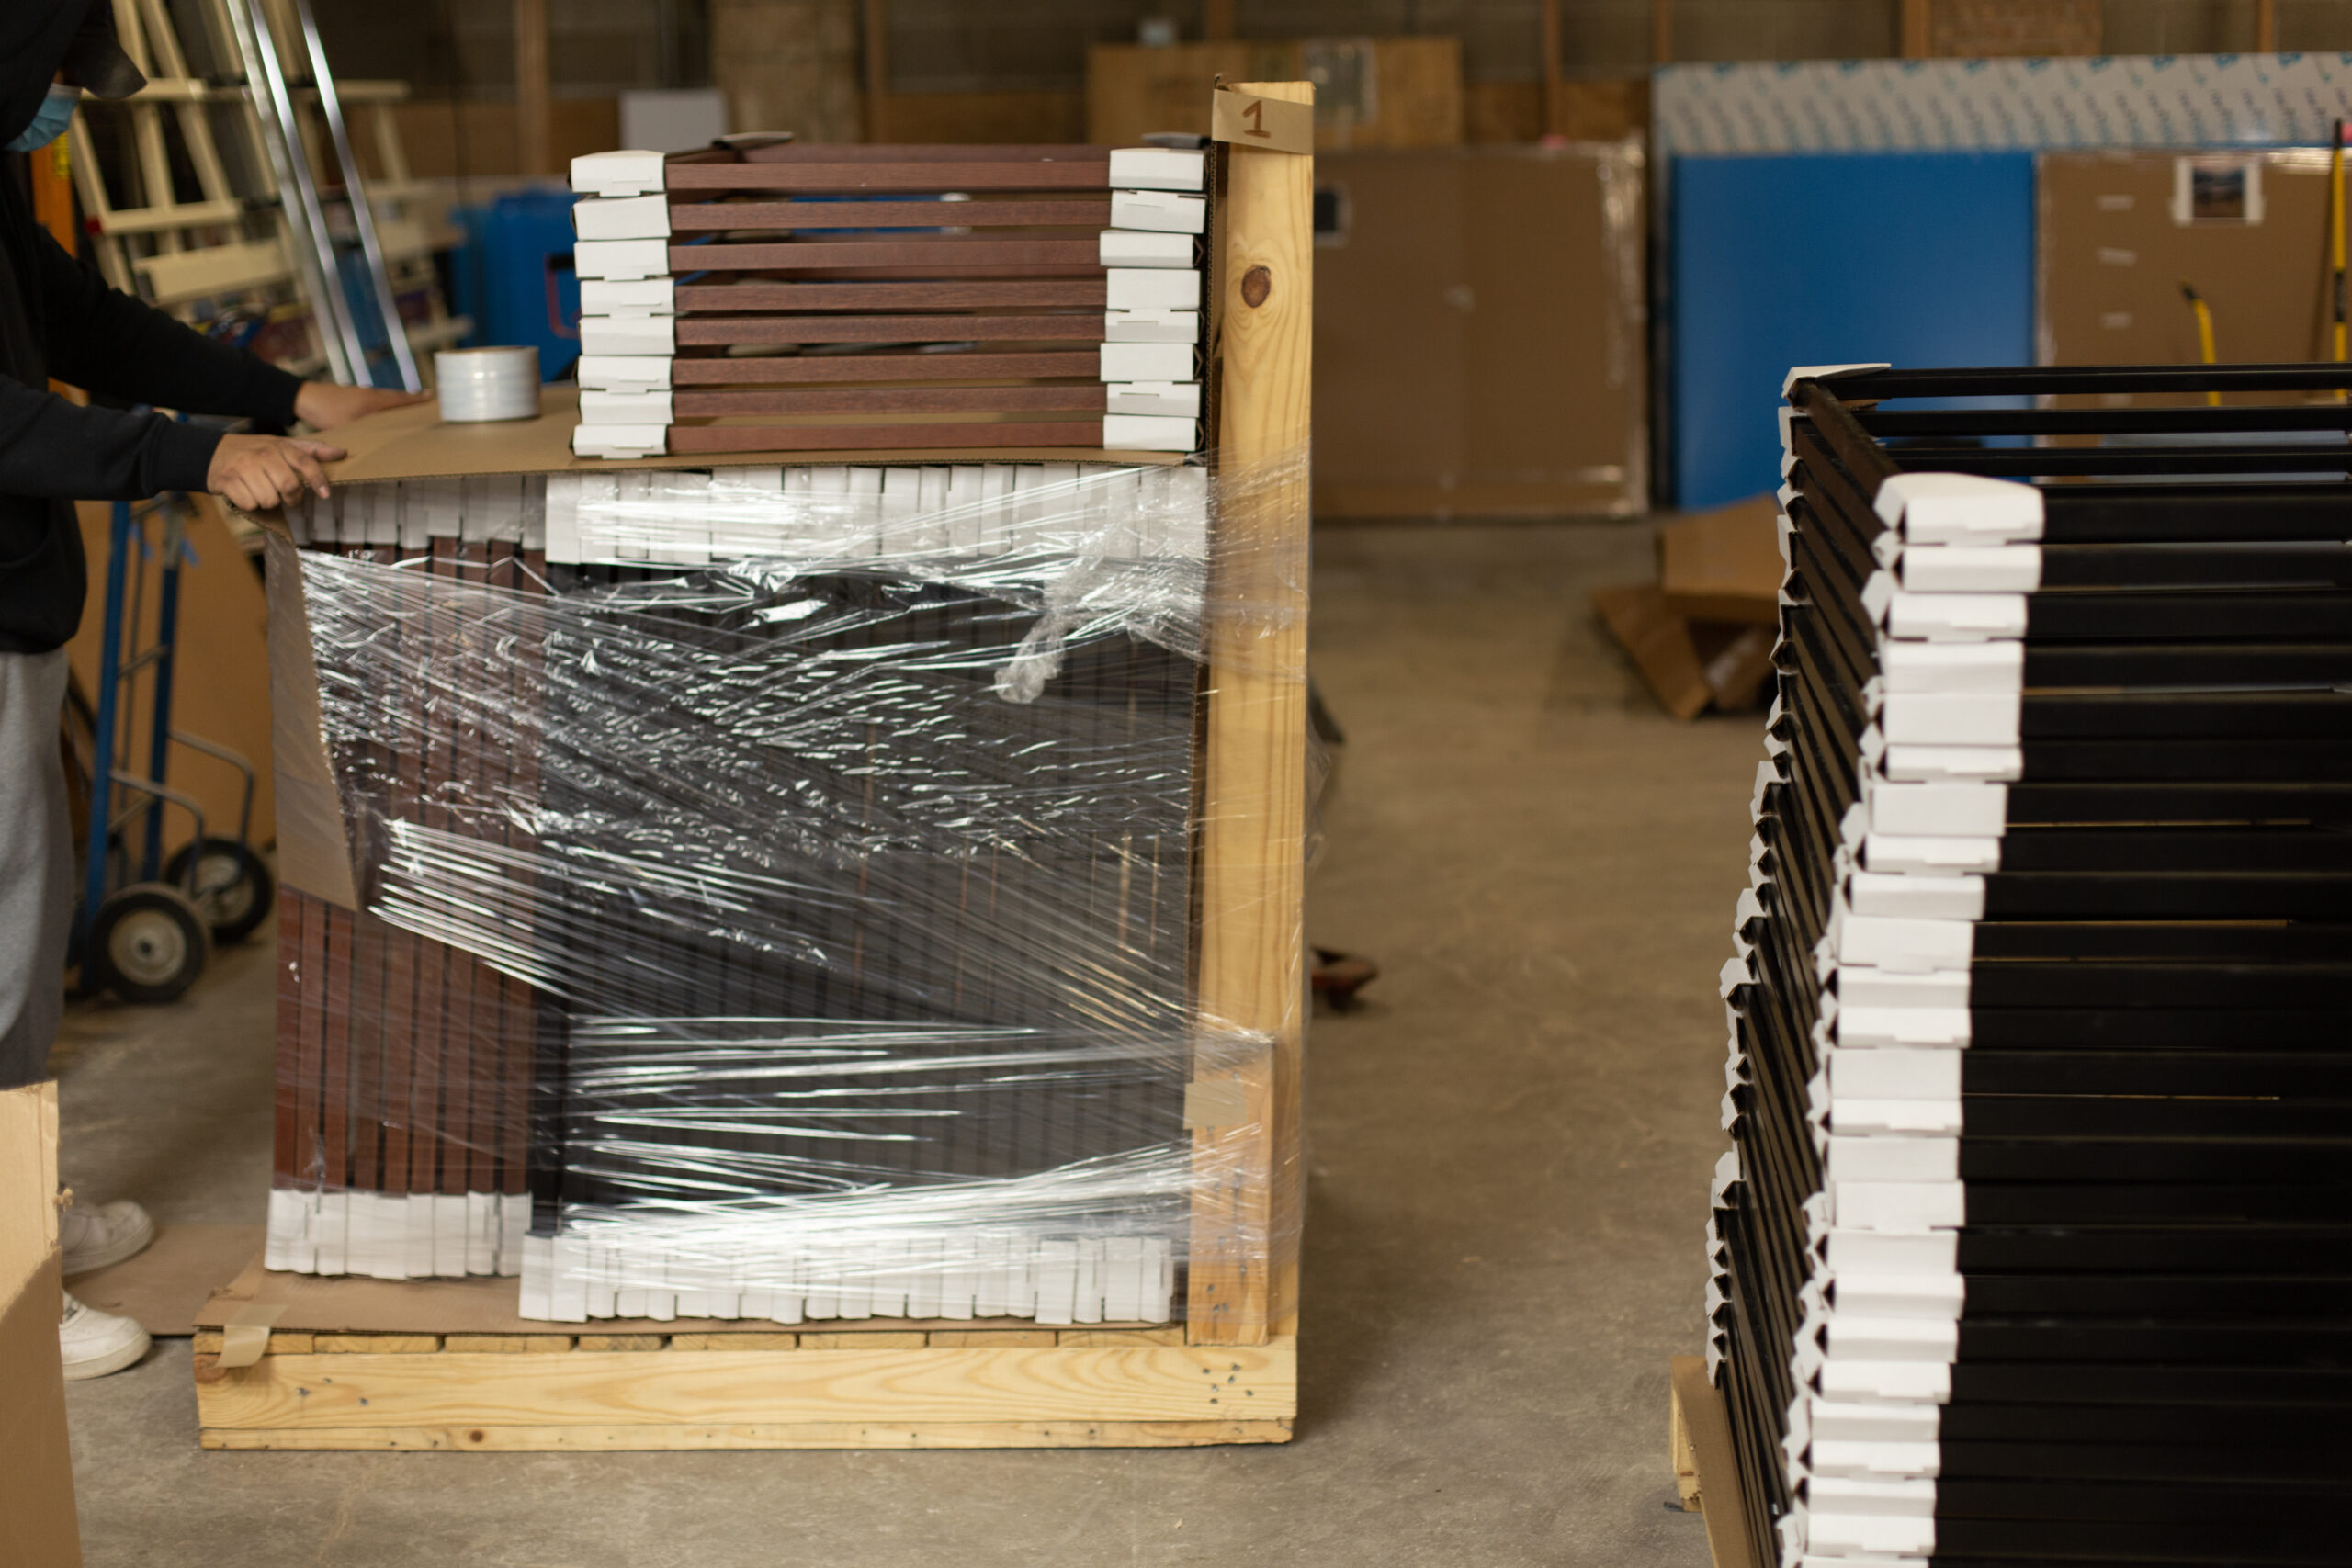 A worker with a wooden palette with stacks of wooden frames, ready for use and delivery. Peterson Picture Co. offers secure delivery and installation services.